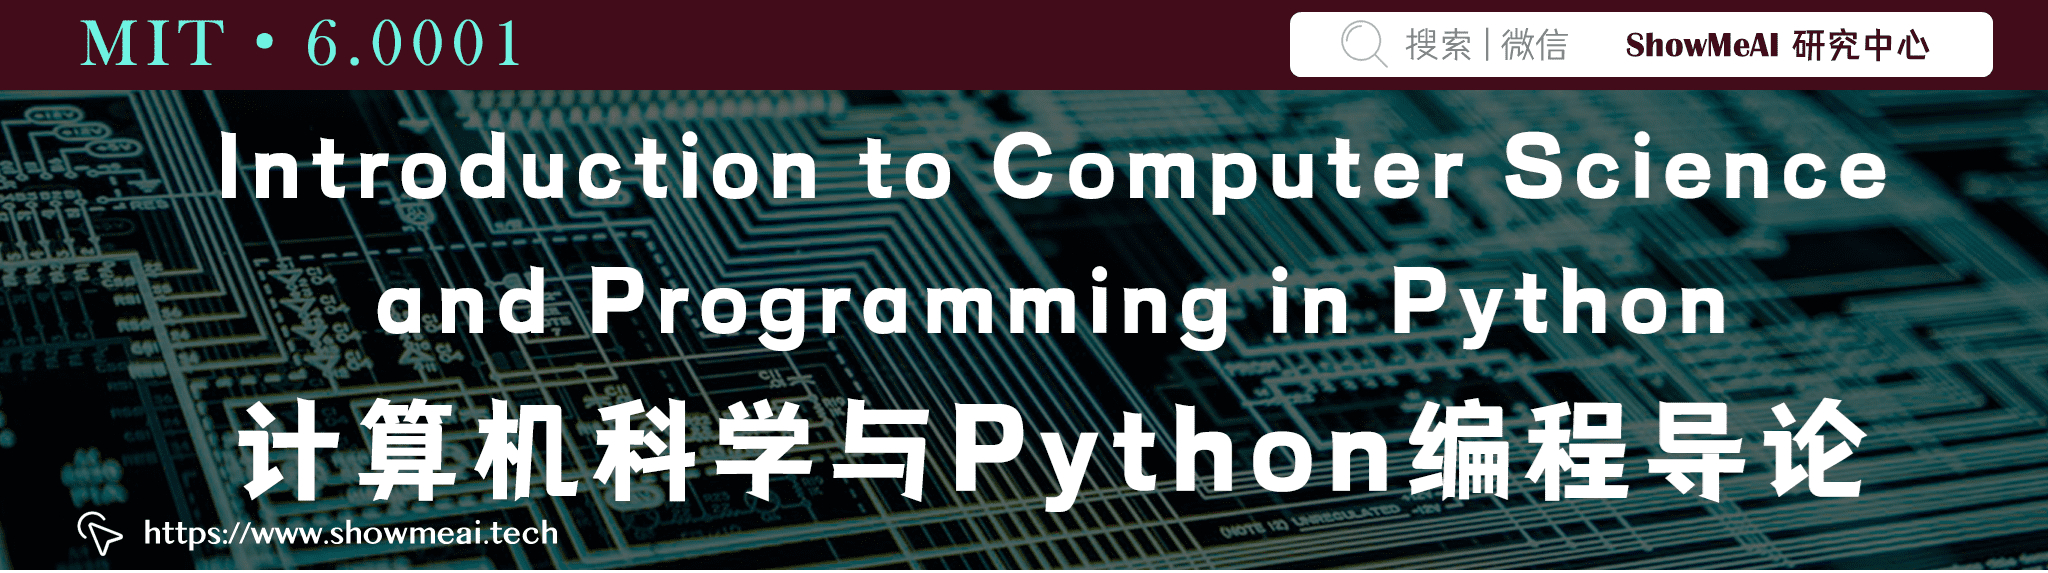 6.0001; Introduction to Computer Science and Programming in Python; 计算机科学与Python编程导论